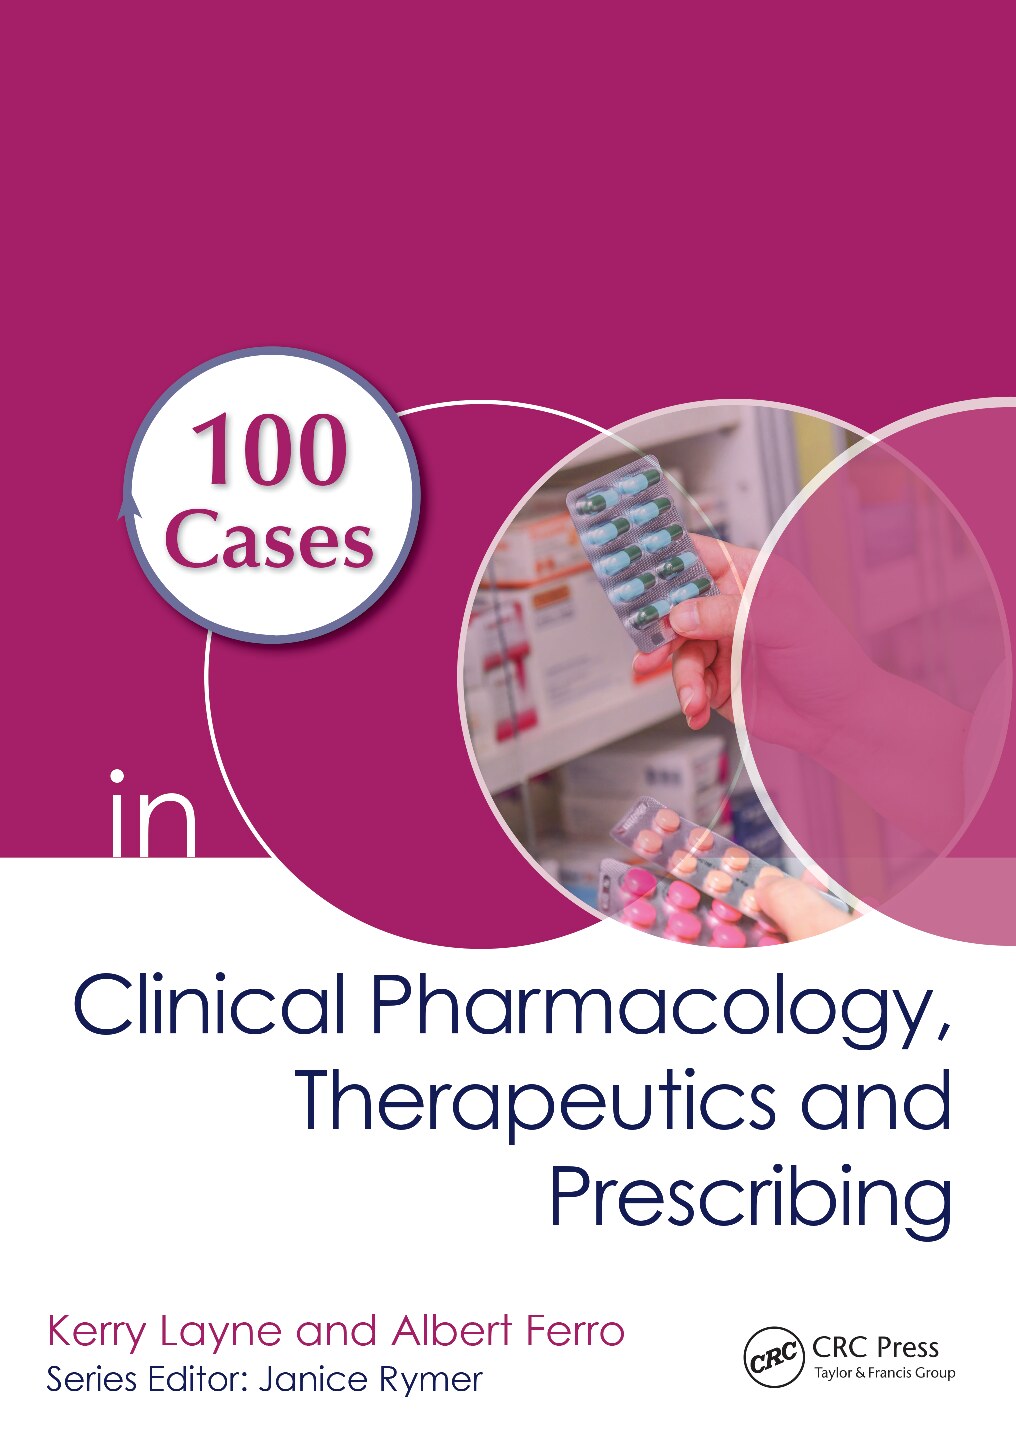 100 cases in clinical pharmacology, therapeutics and prescribing (2020)